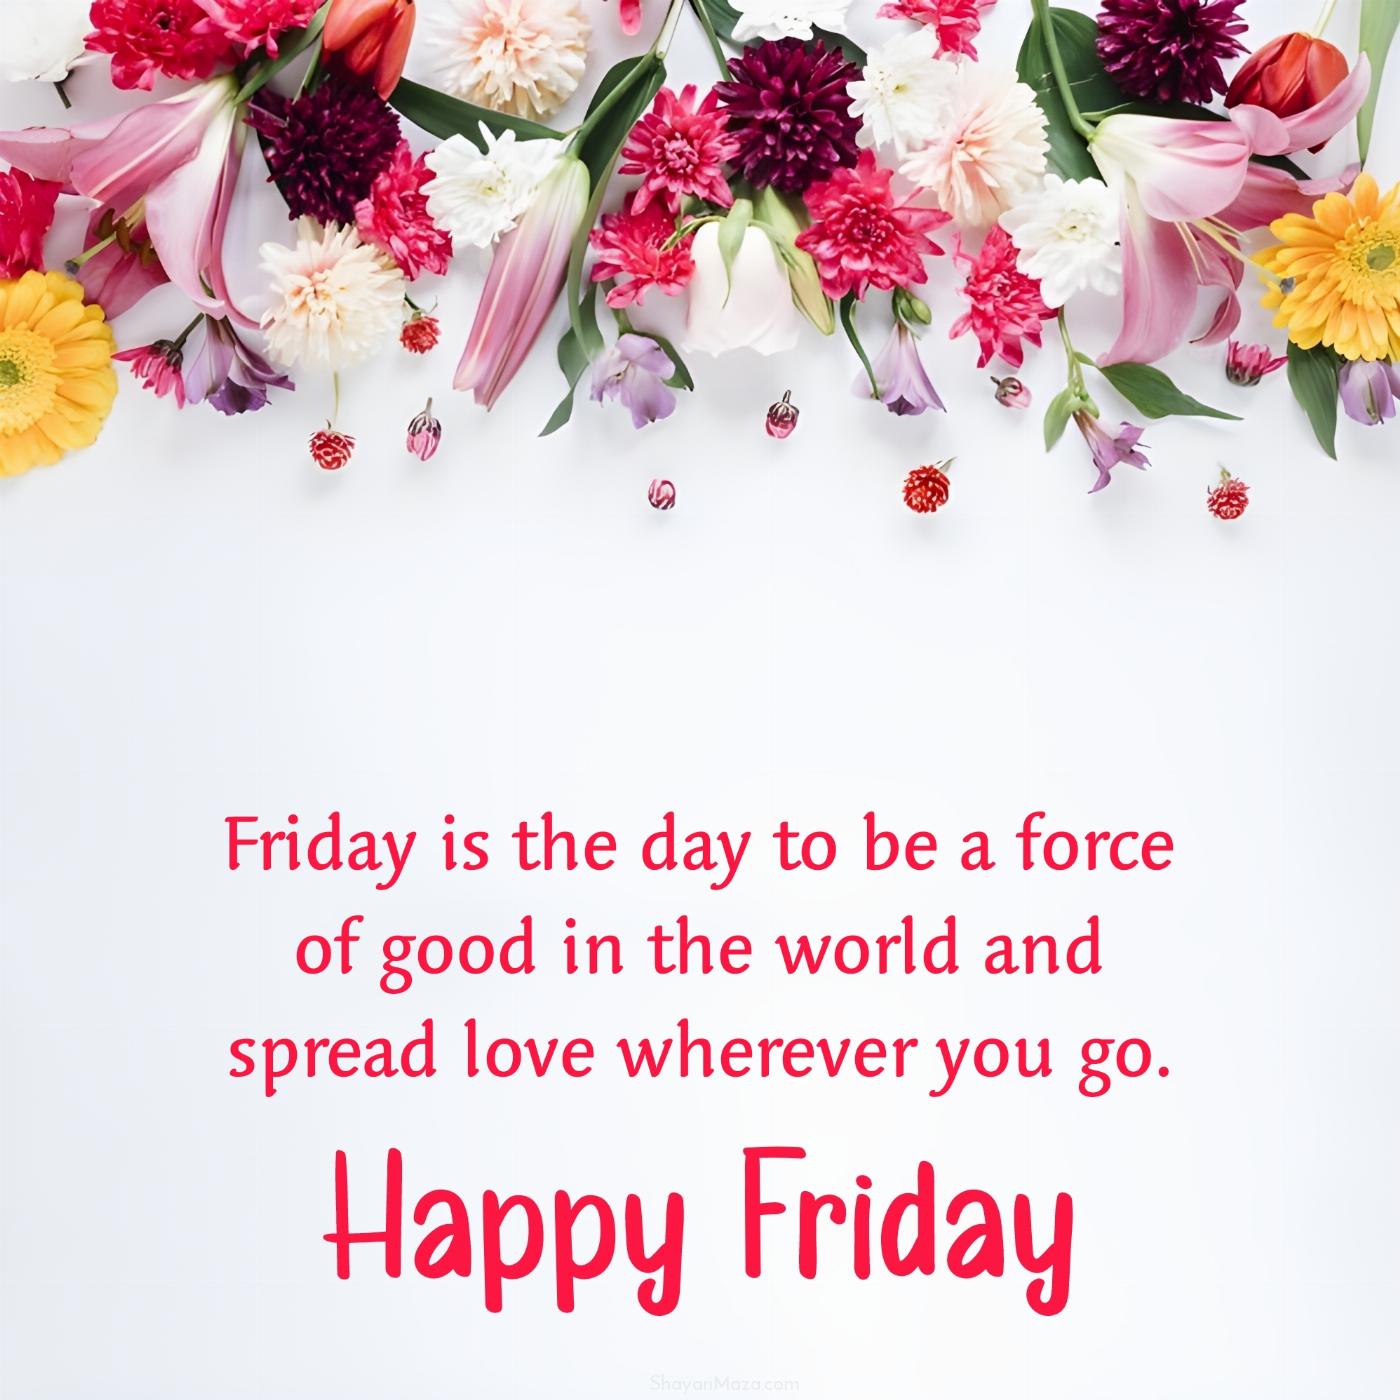 Friday is the day to be a force of good in the world